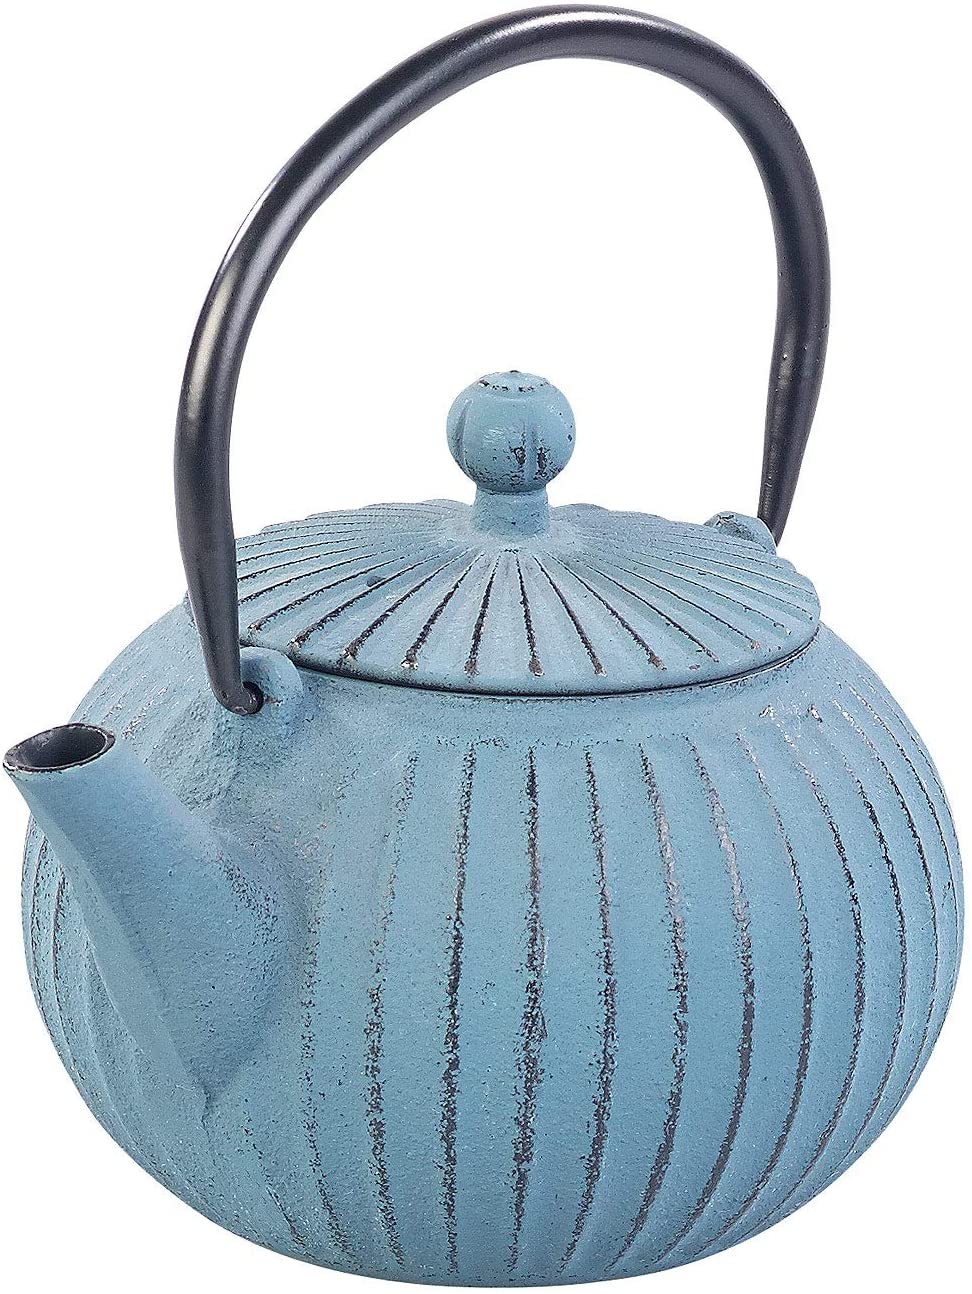 Rosenstein & Söhne Asian Cast Iron Teapot with Stainless Steel Strainer 0.5L Blue